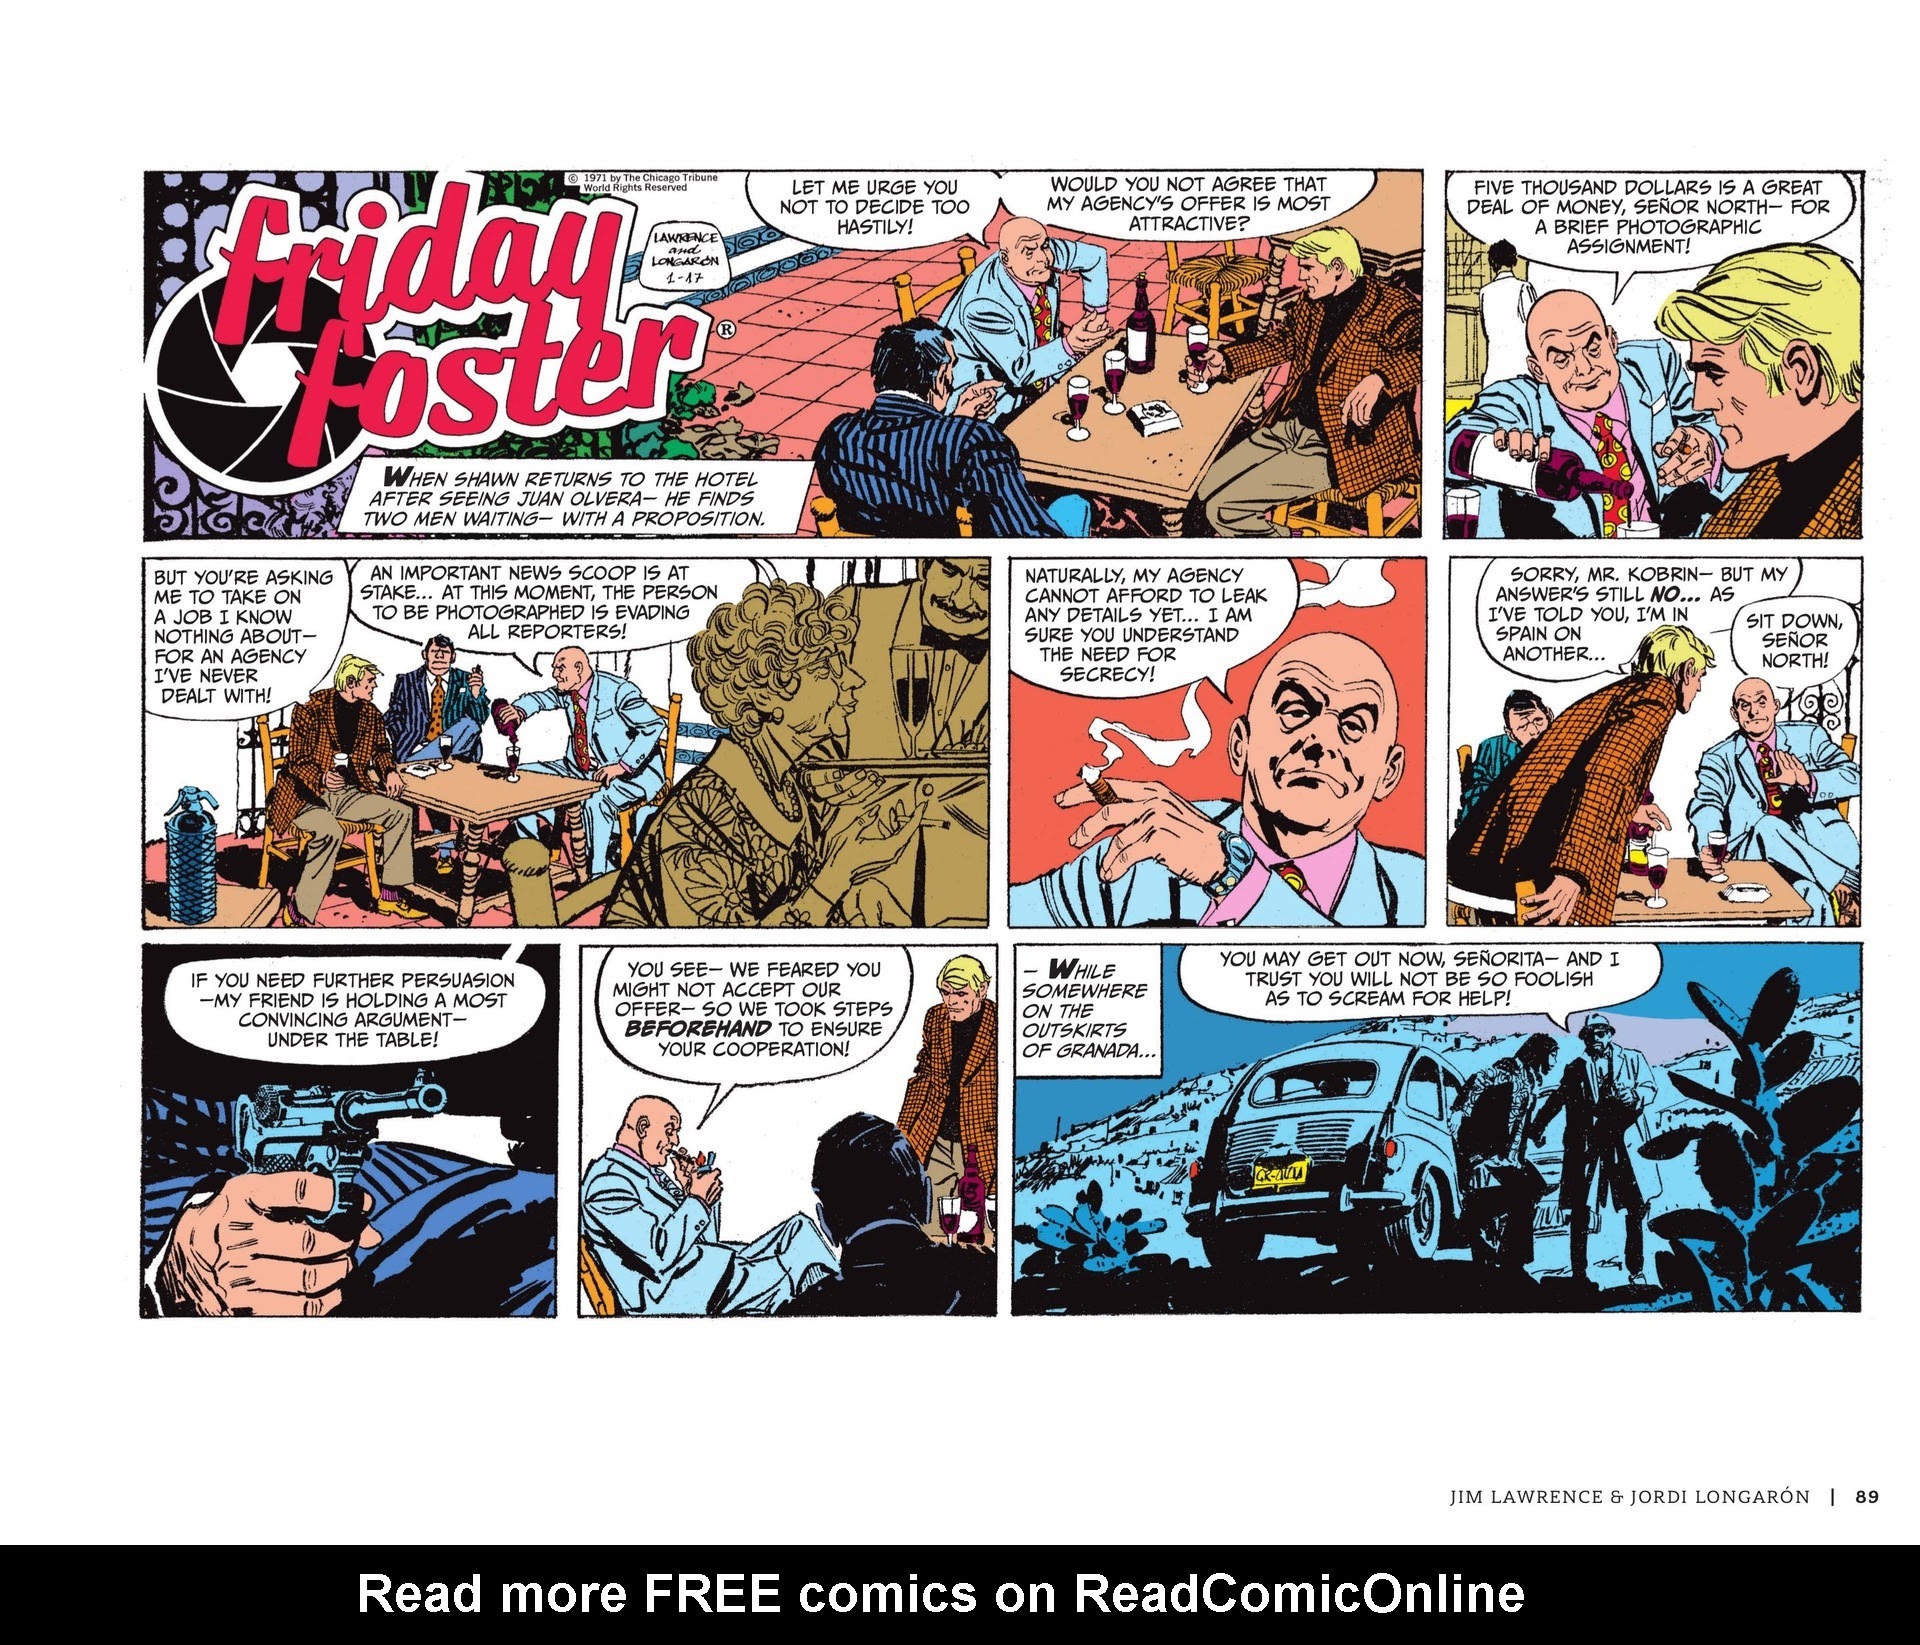 Read online Friday Foster: The Sunday Strips comic -  Issue # TPB (Part 1) - 90